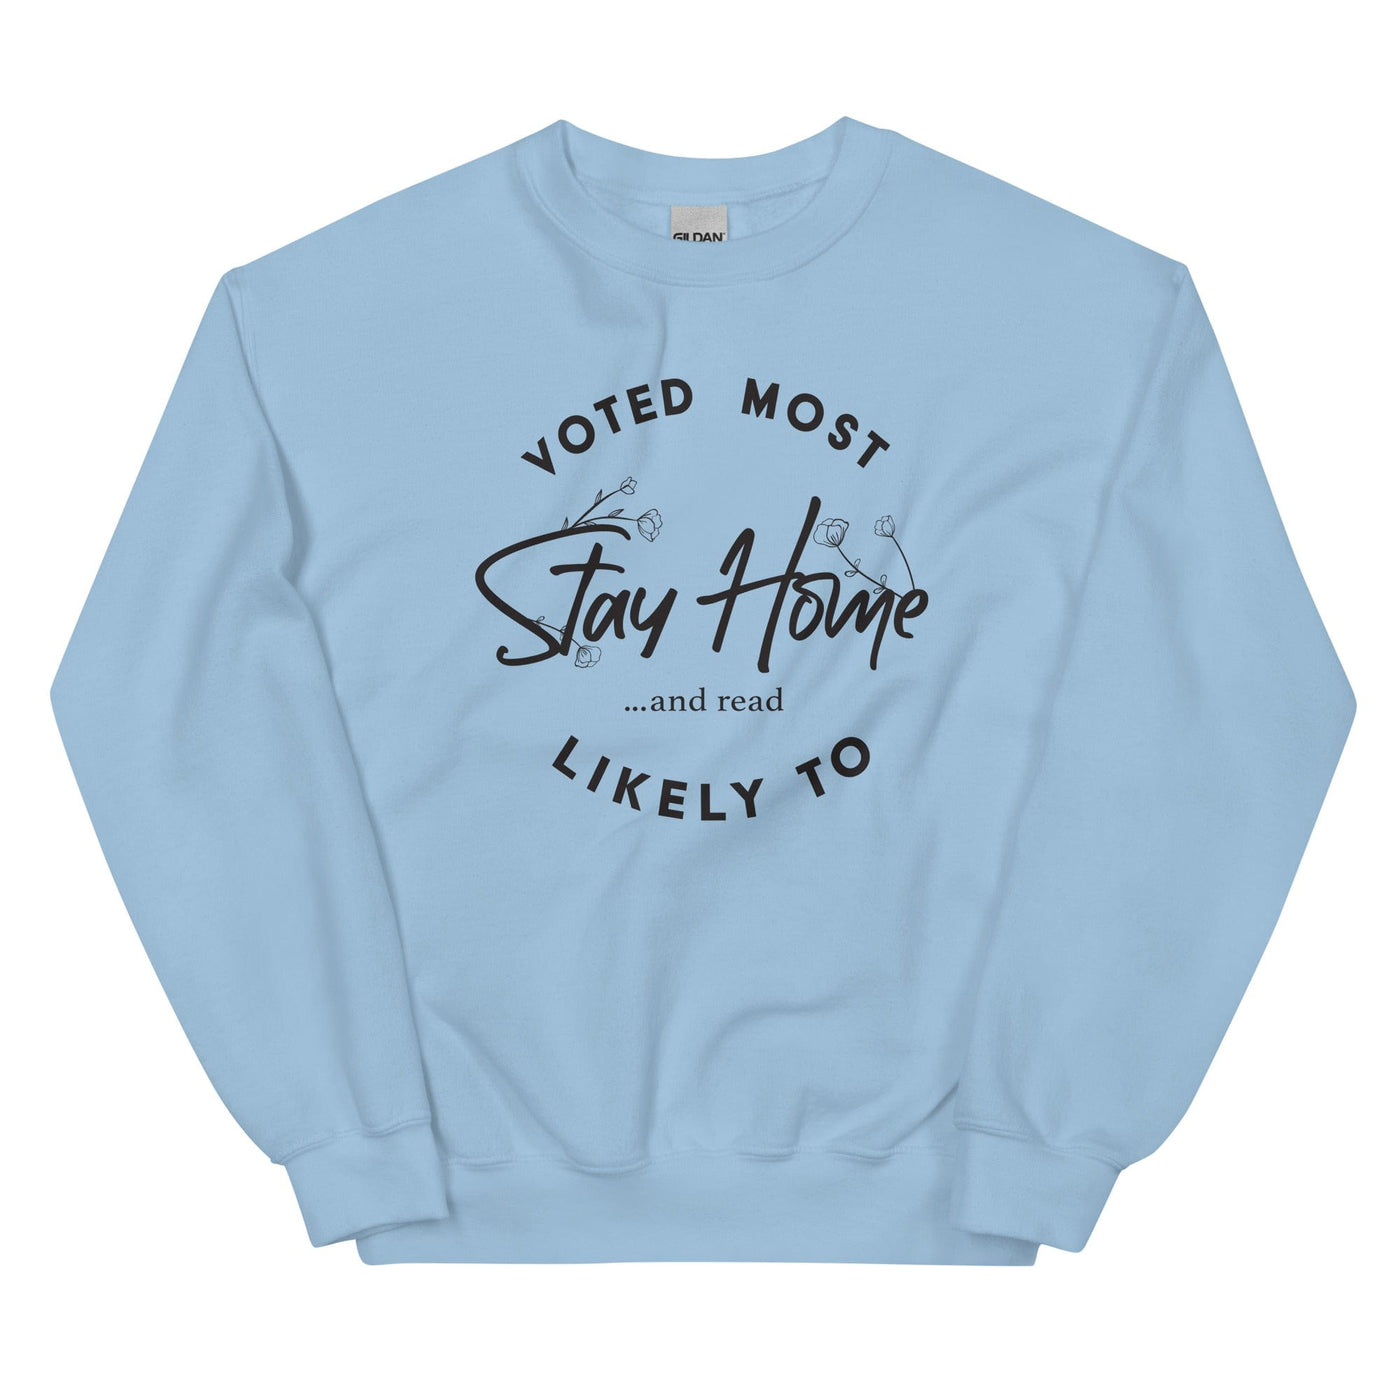 Lit Haven Booktique Sweatshirt Light Blue / S Voted Most Likely to Stay Home & Read crew neck sweatshirt